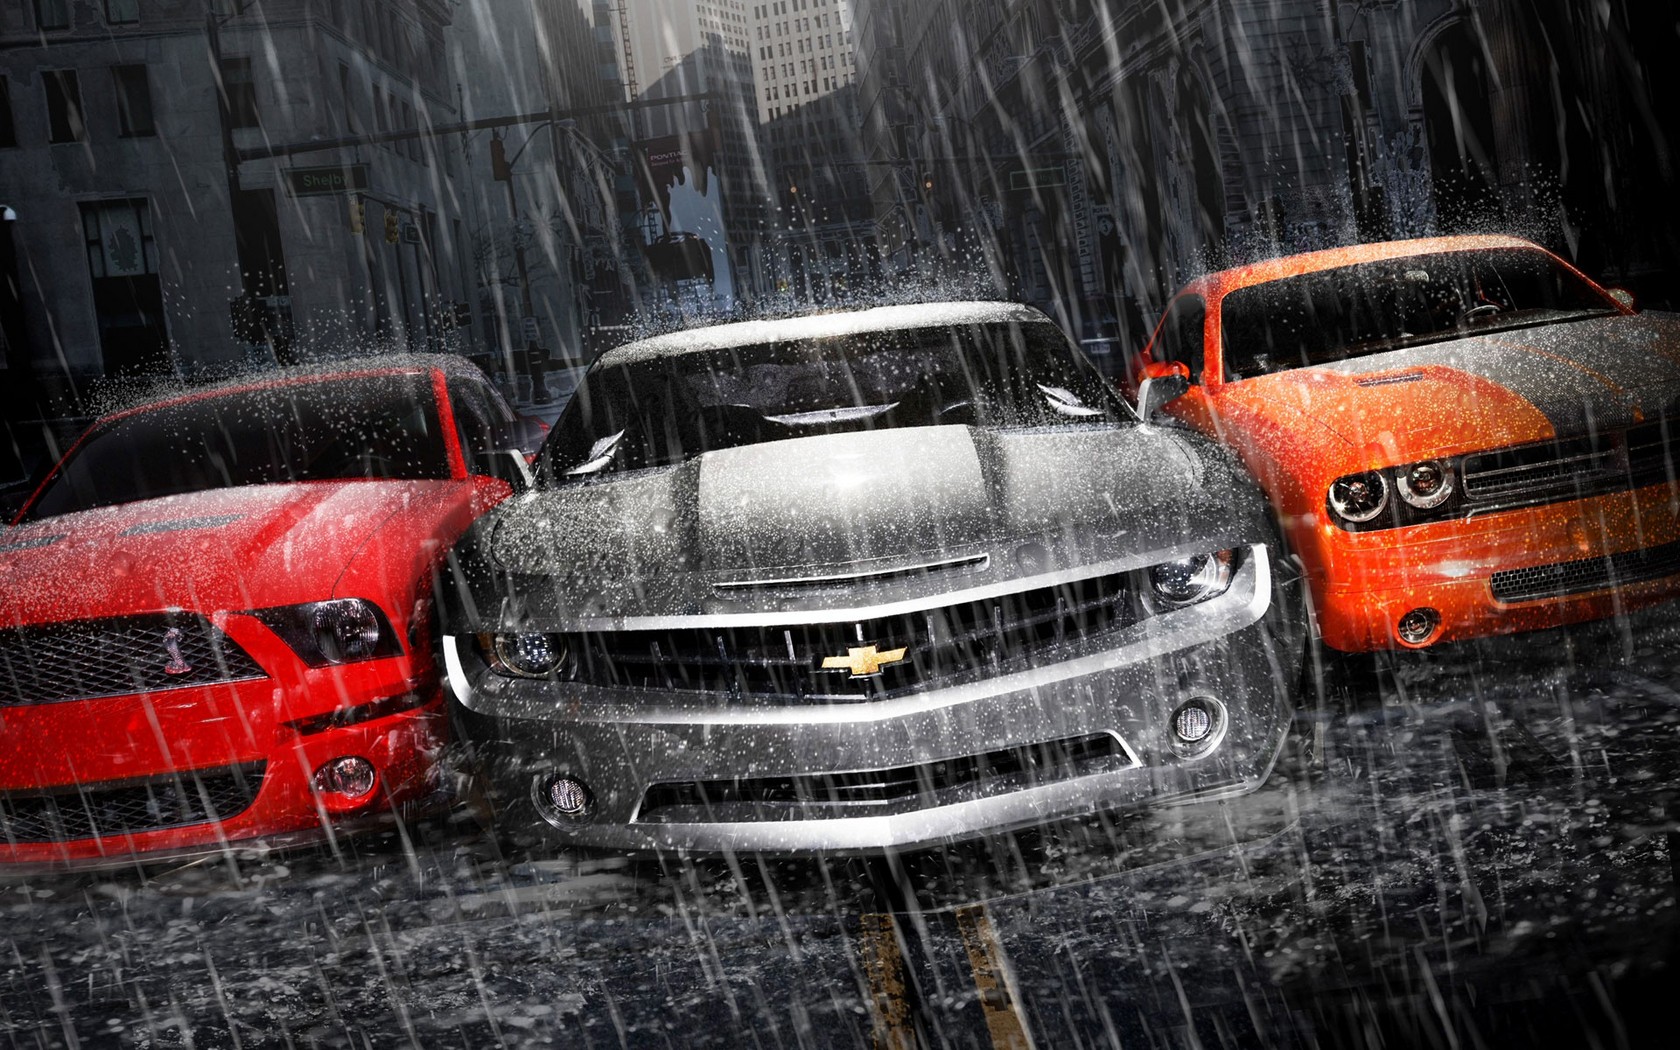 Wallpaper, 1680x1050 px, Chevrolet, muscle cars 1680x1050